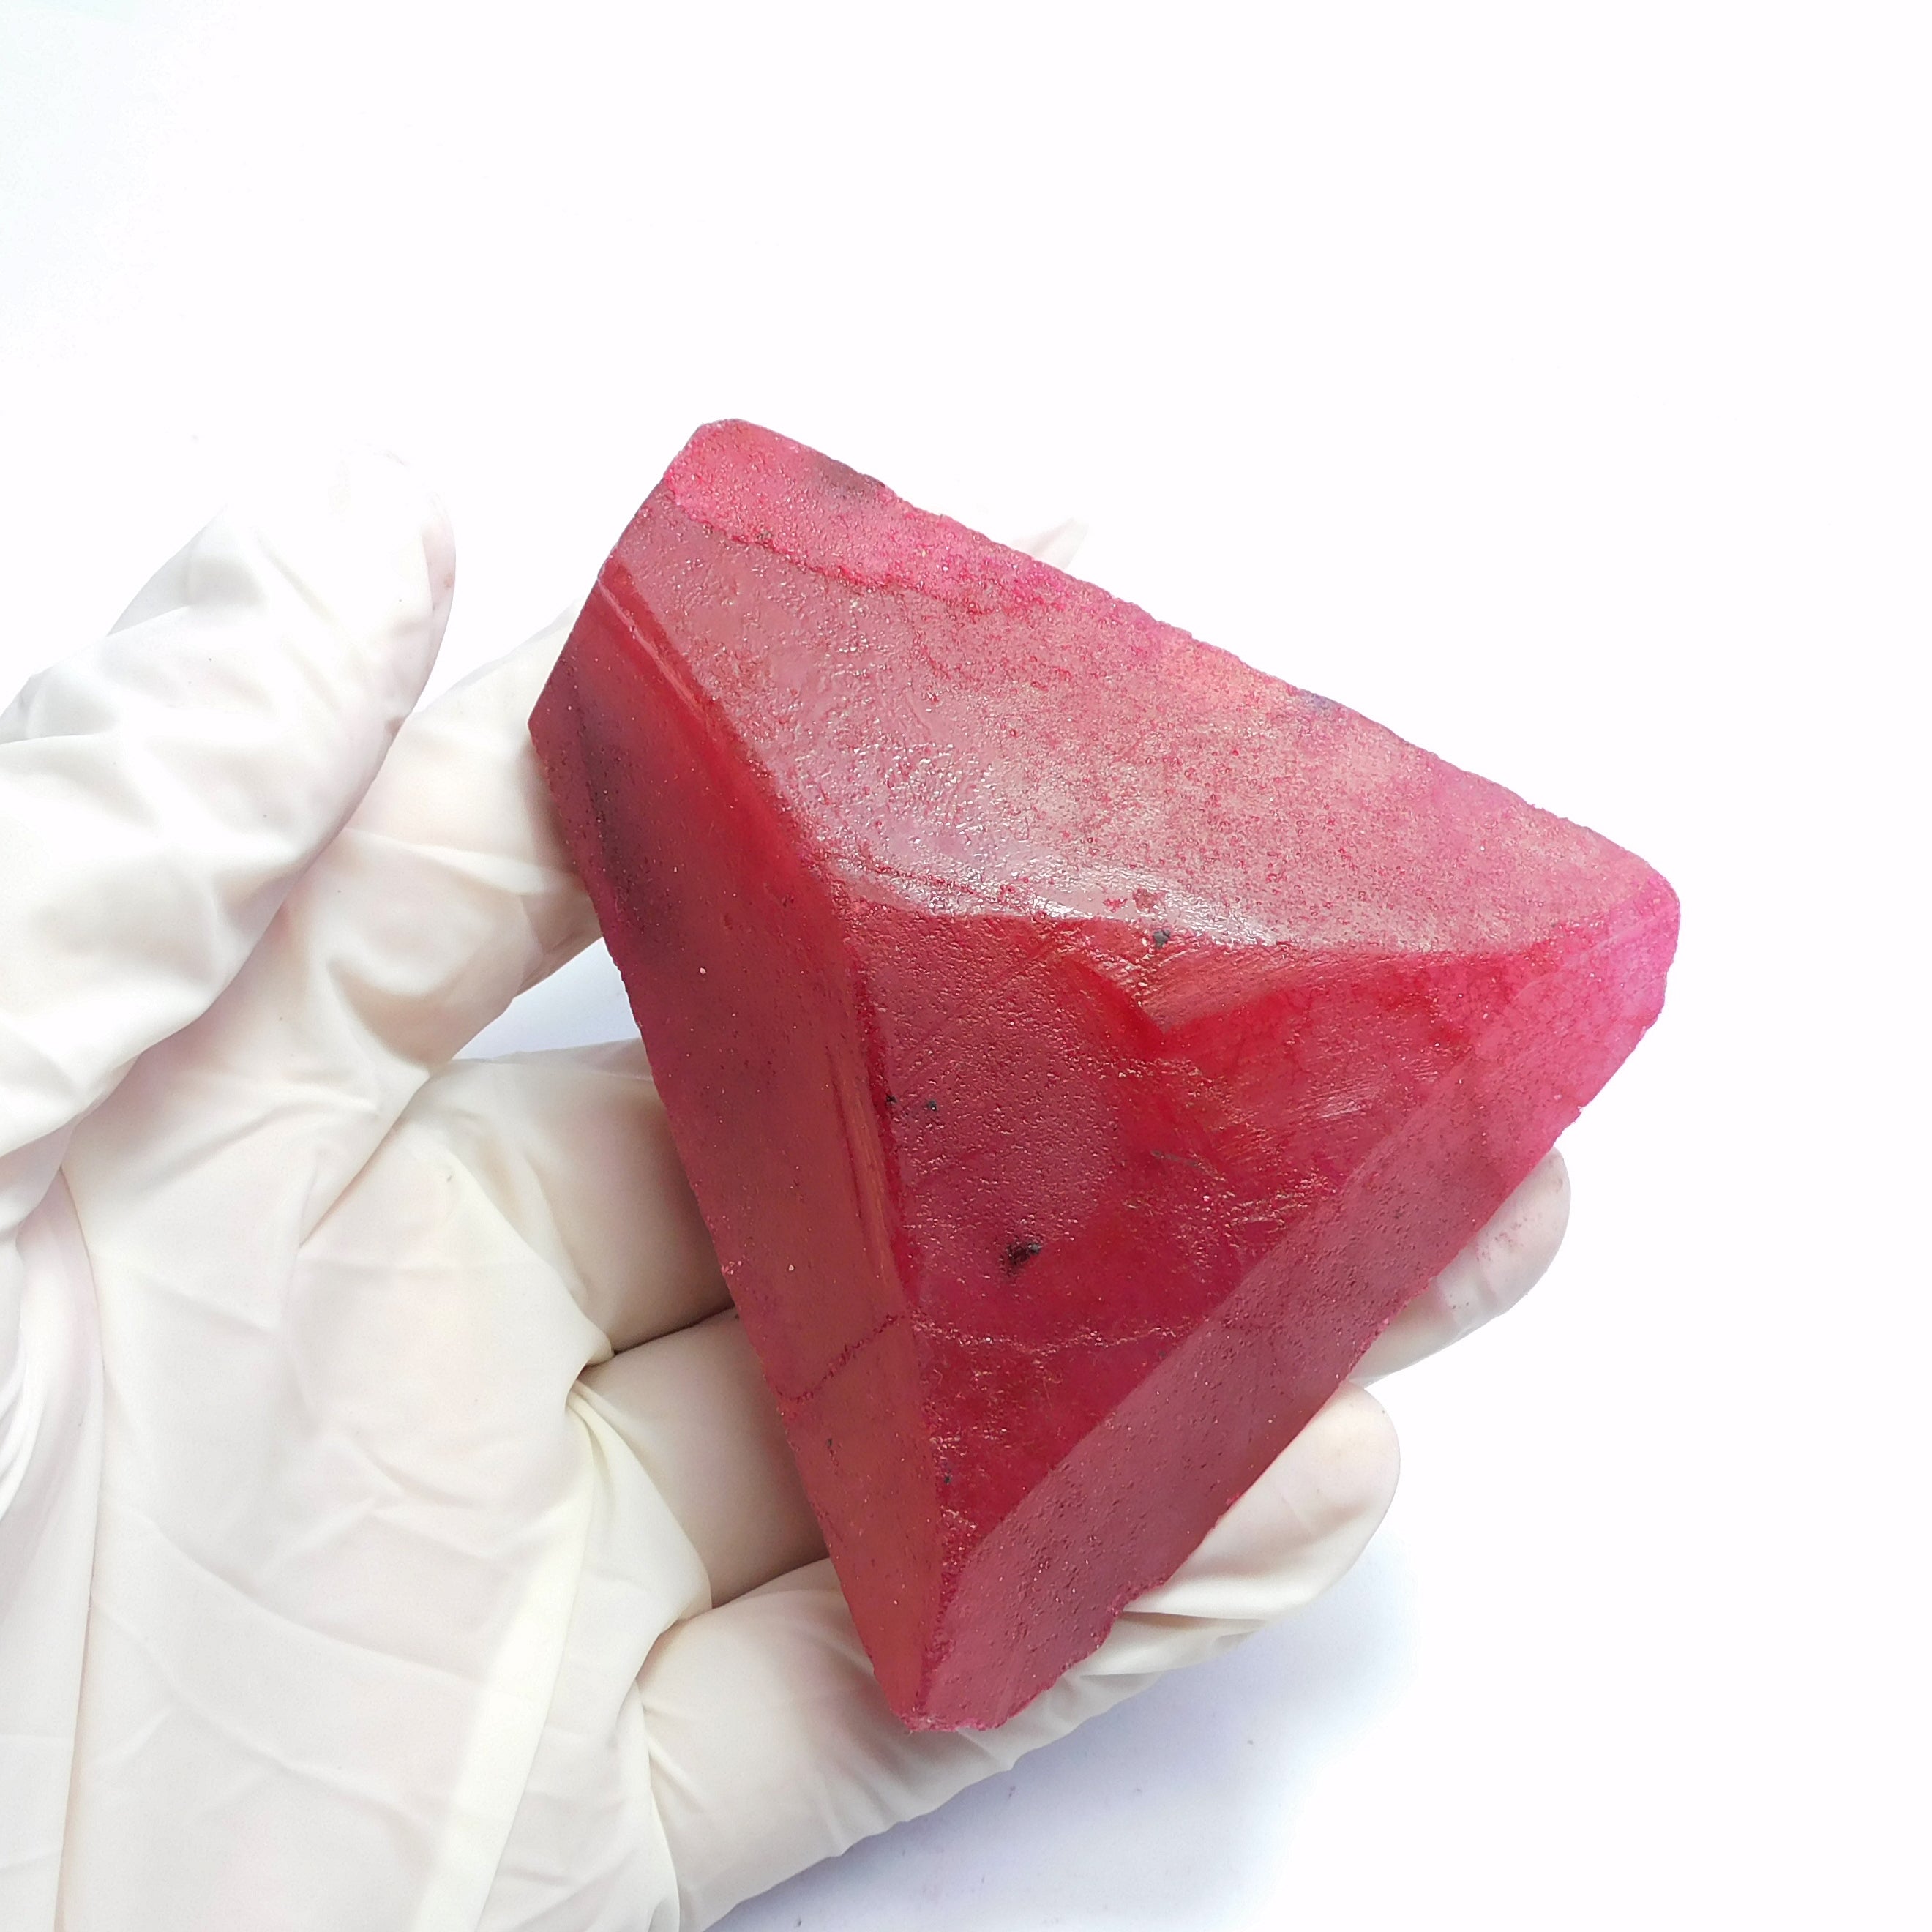 Beautiful Jwelery Making Huge Size Rough 722.00 Carat Natural Ruby Red Uncut Rough CERTIFIED Natural Loose Gemstone | Gift For Her/ Him | Best Offer